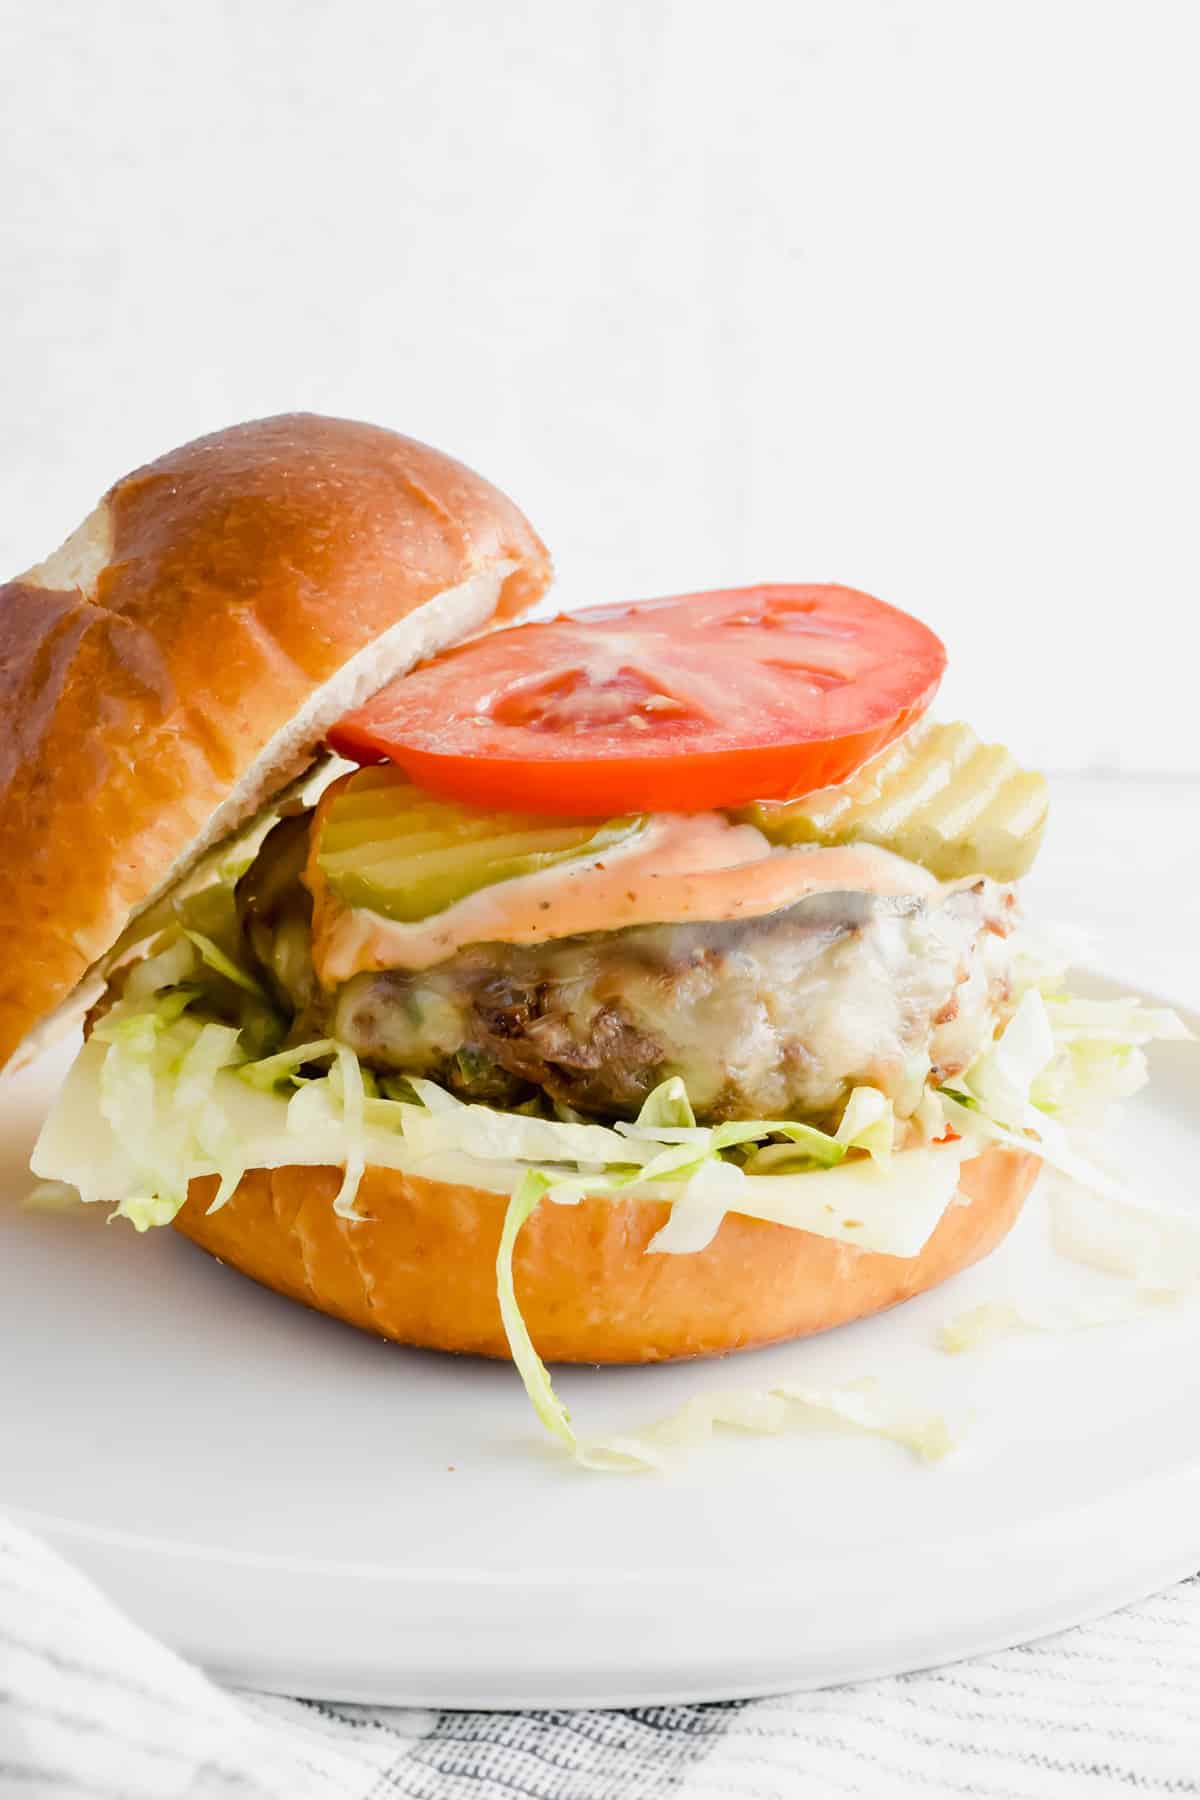 Ground beef burgers with onions and cheese with lettuce, tomato, and pickles.